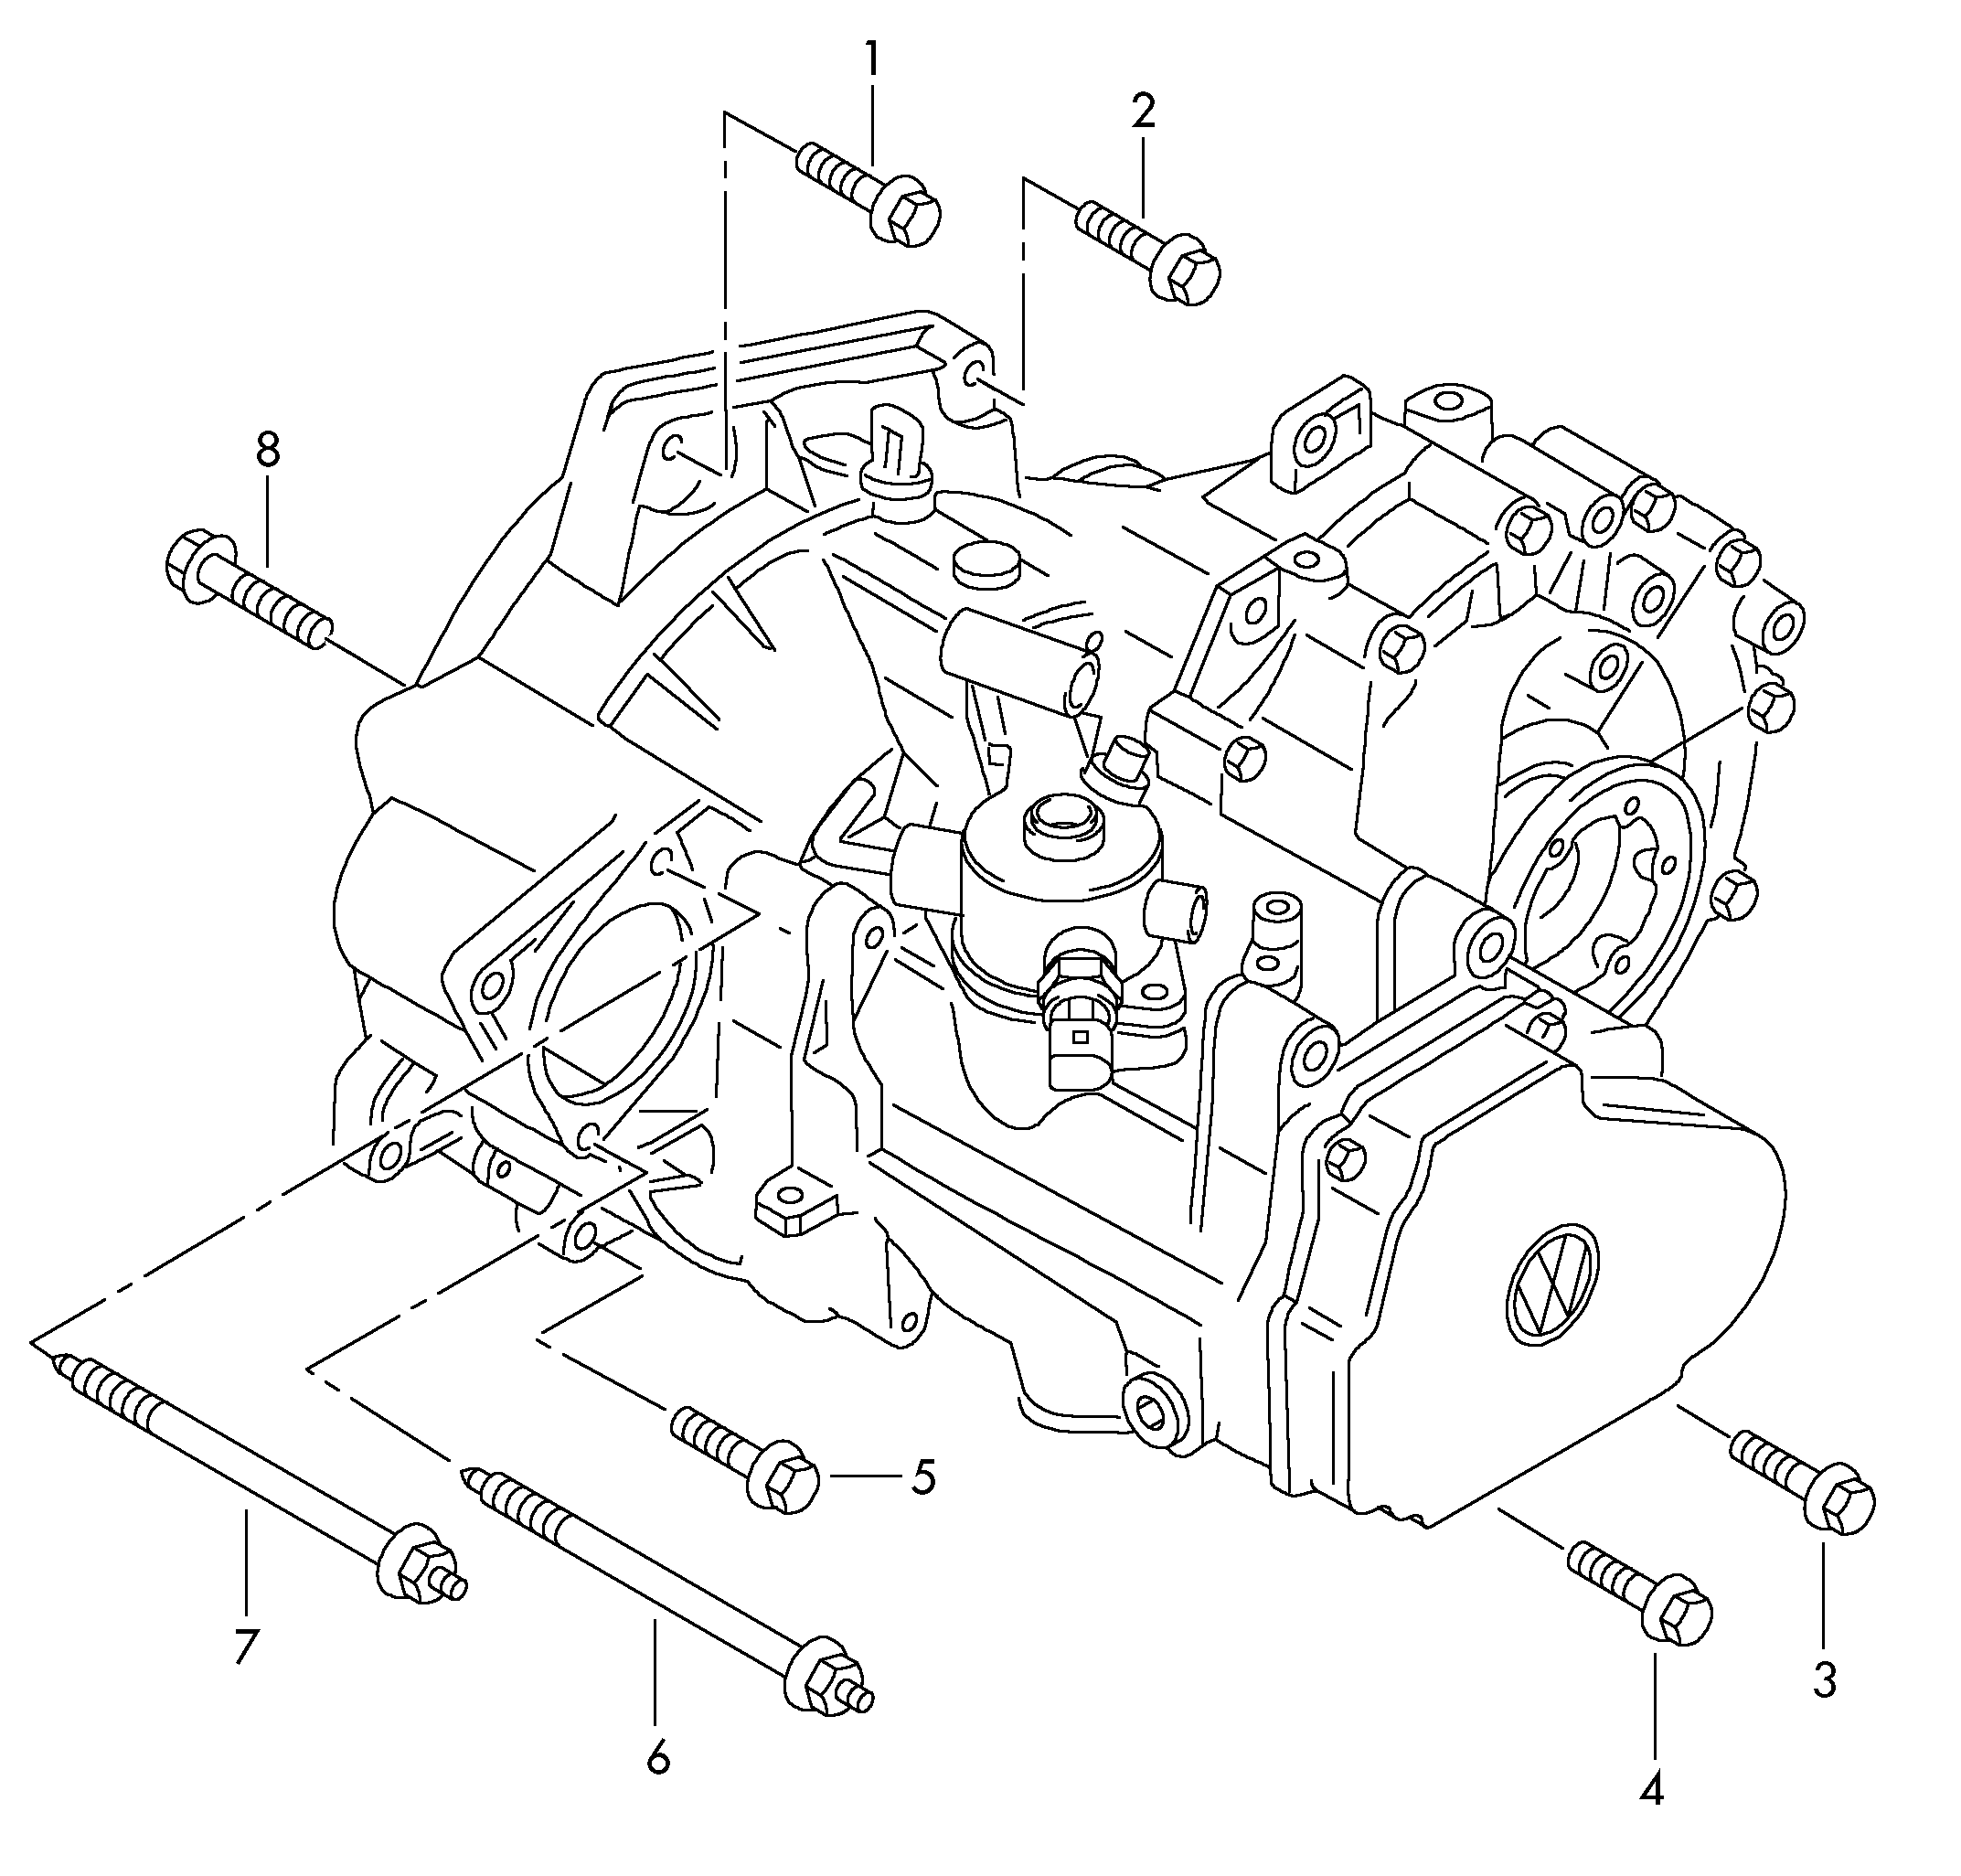 mounting parts for engine and<br>transmissionfor 5 speed manual transmiss. MQ250 - Golf/Variant/4Motion - golf